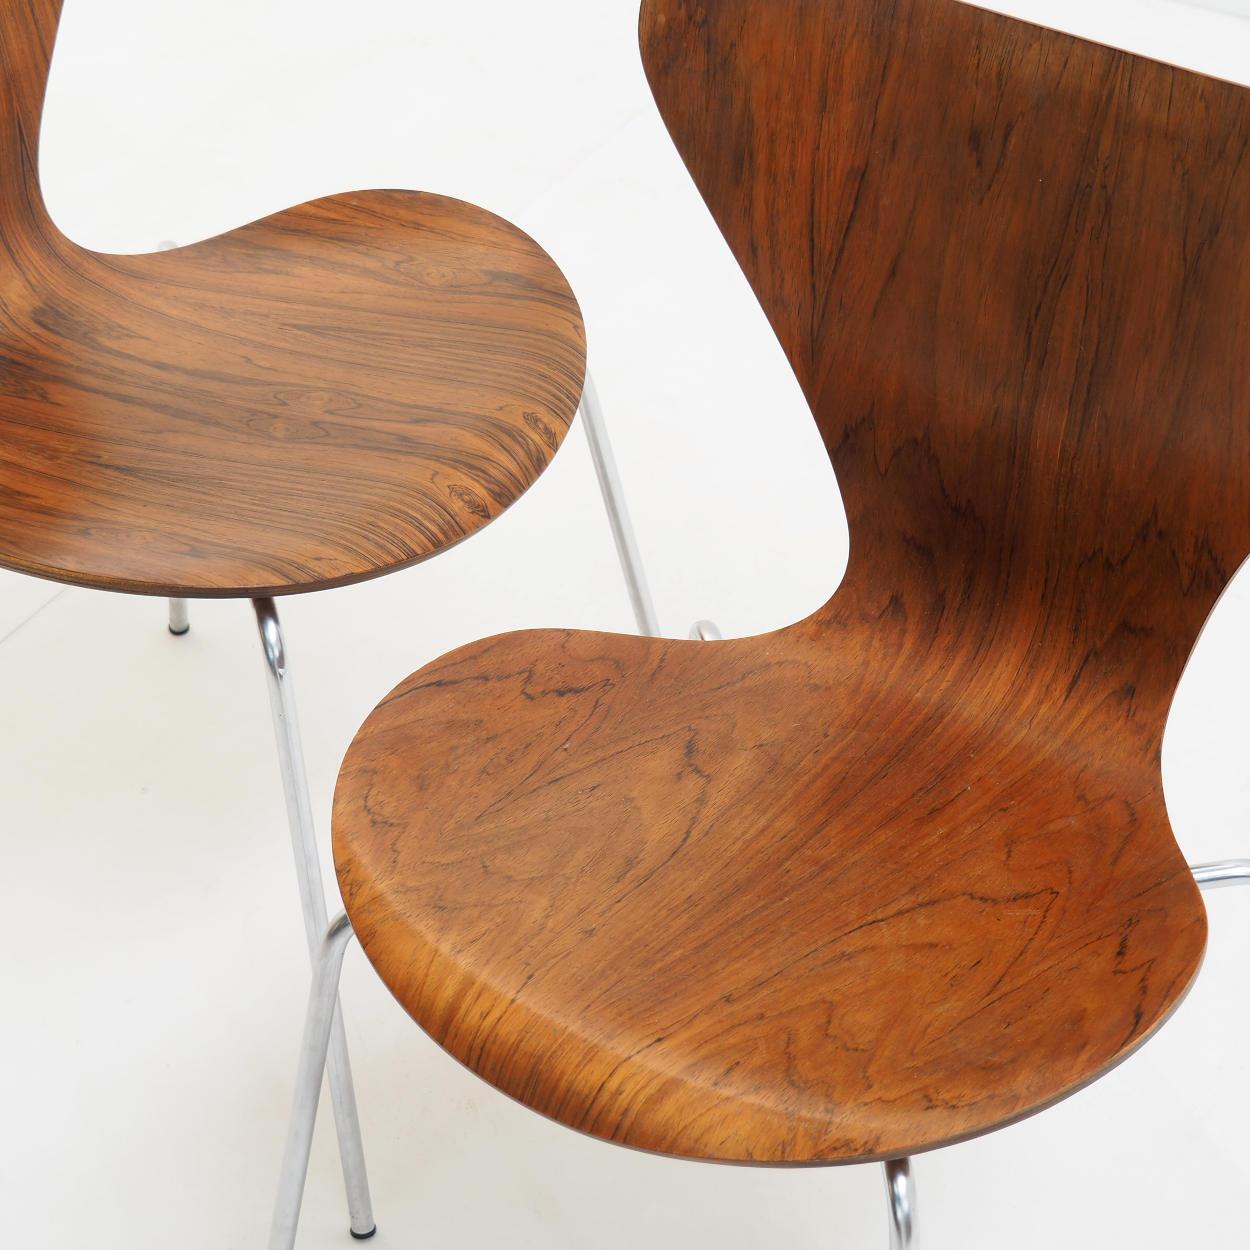 Danish Set of 2 Model No. 3107 Chairs by Arne Jacobsen for Fritz Hansen, Rosewood, 1970 For Sale